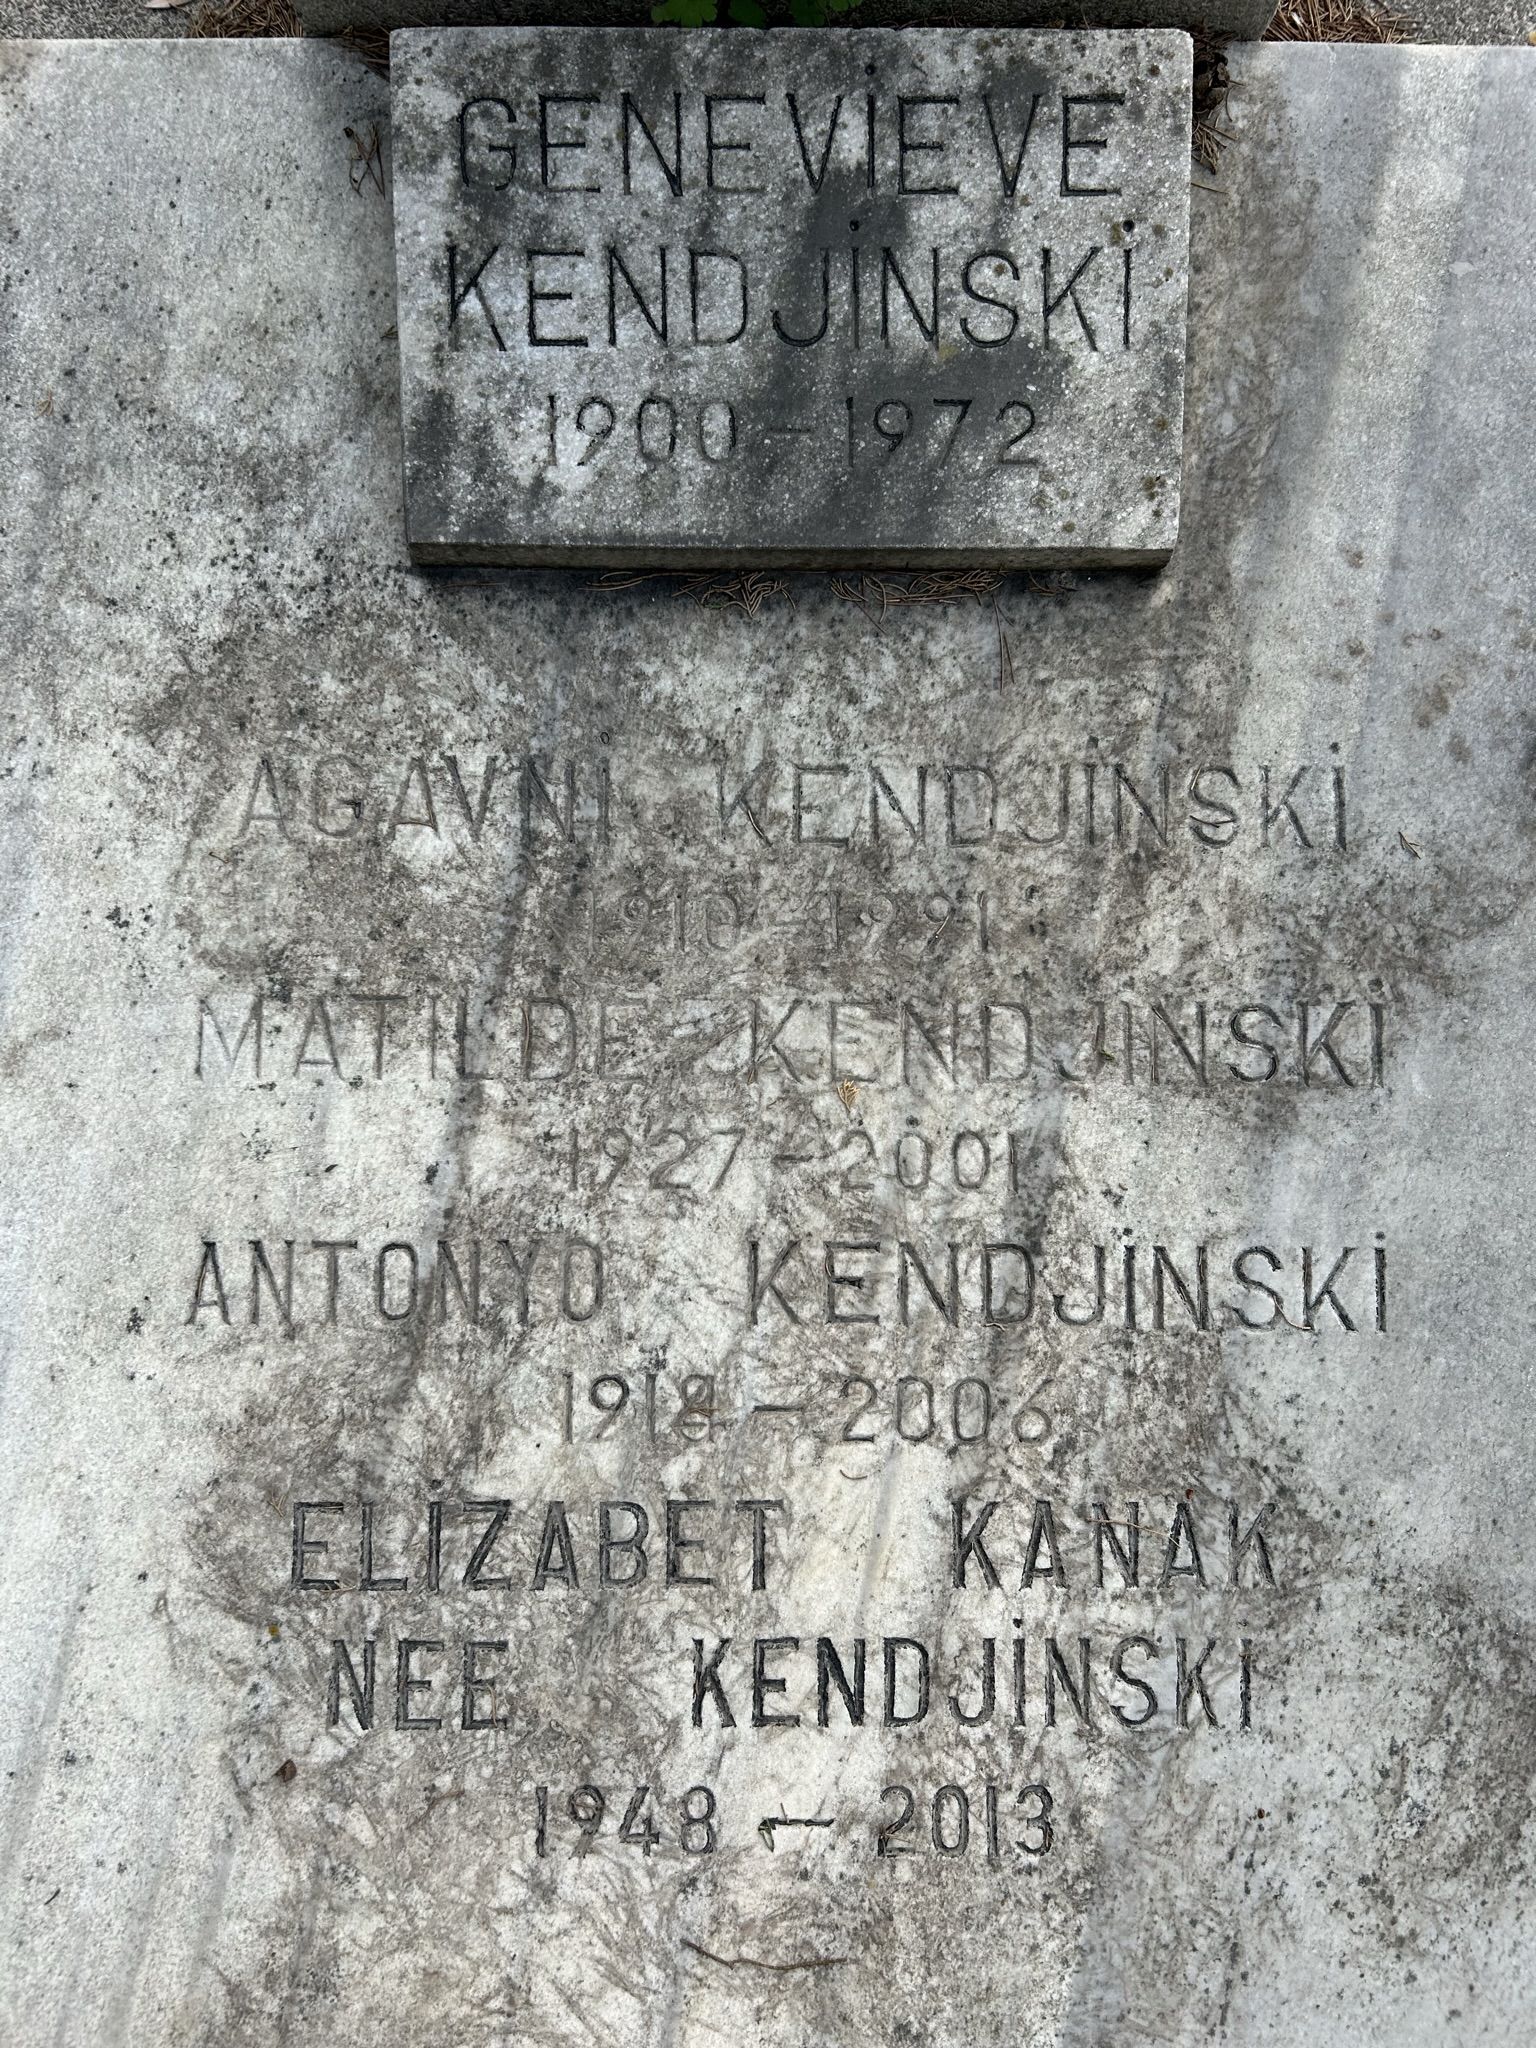 Inscription from the tombstone of the Kendjinski family, Catholic cemetery in Feriköy